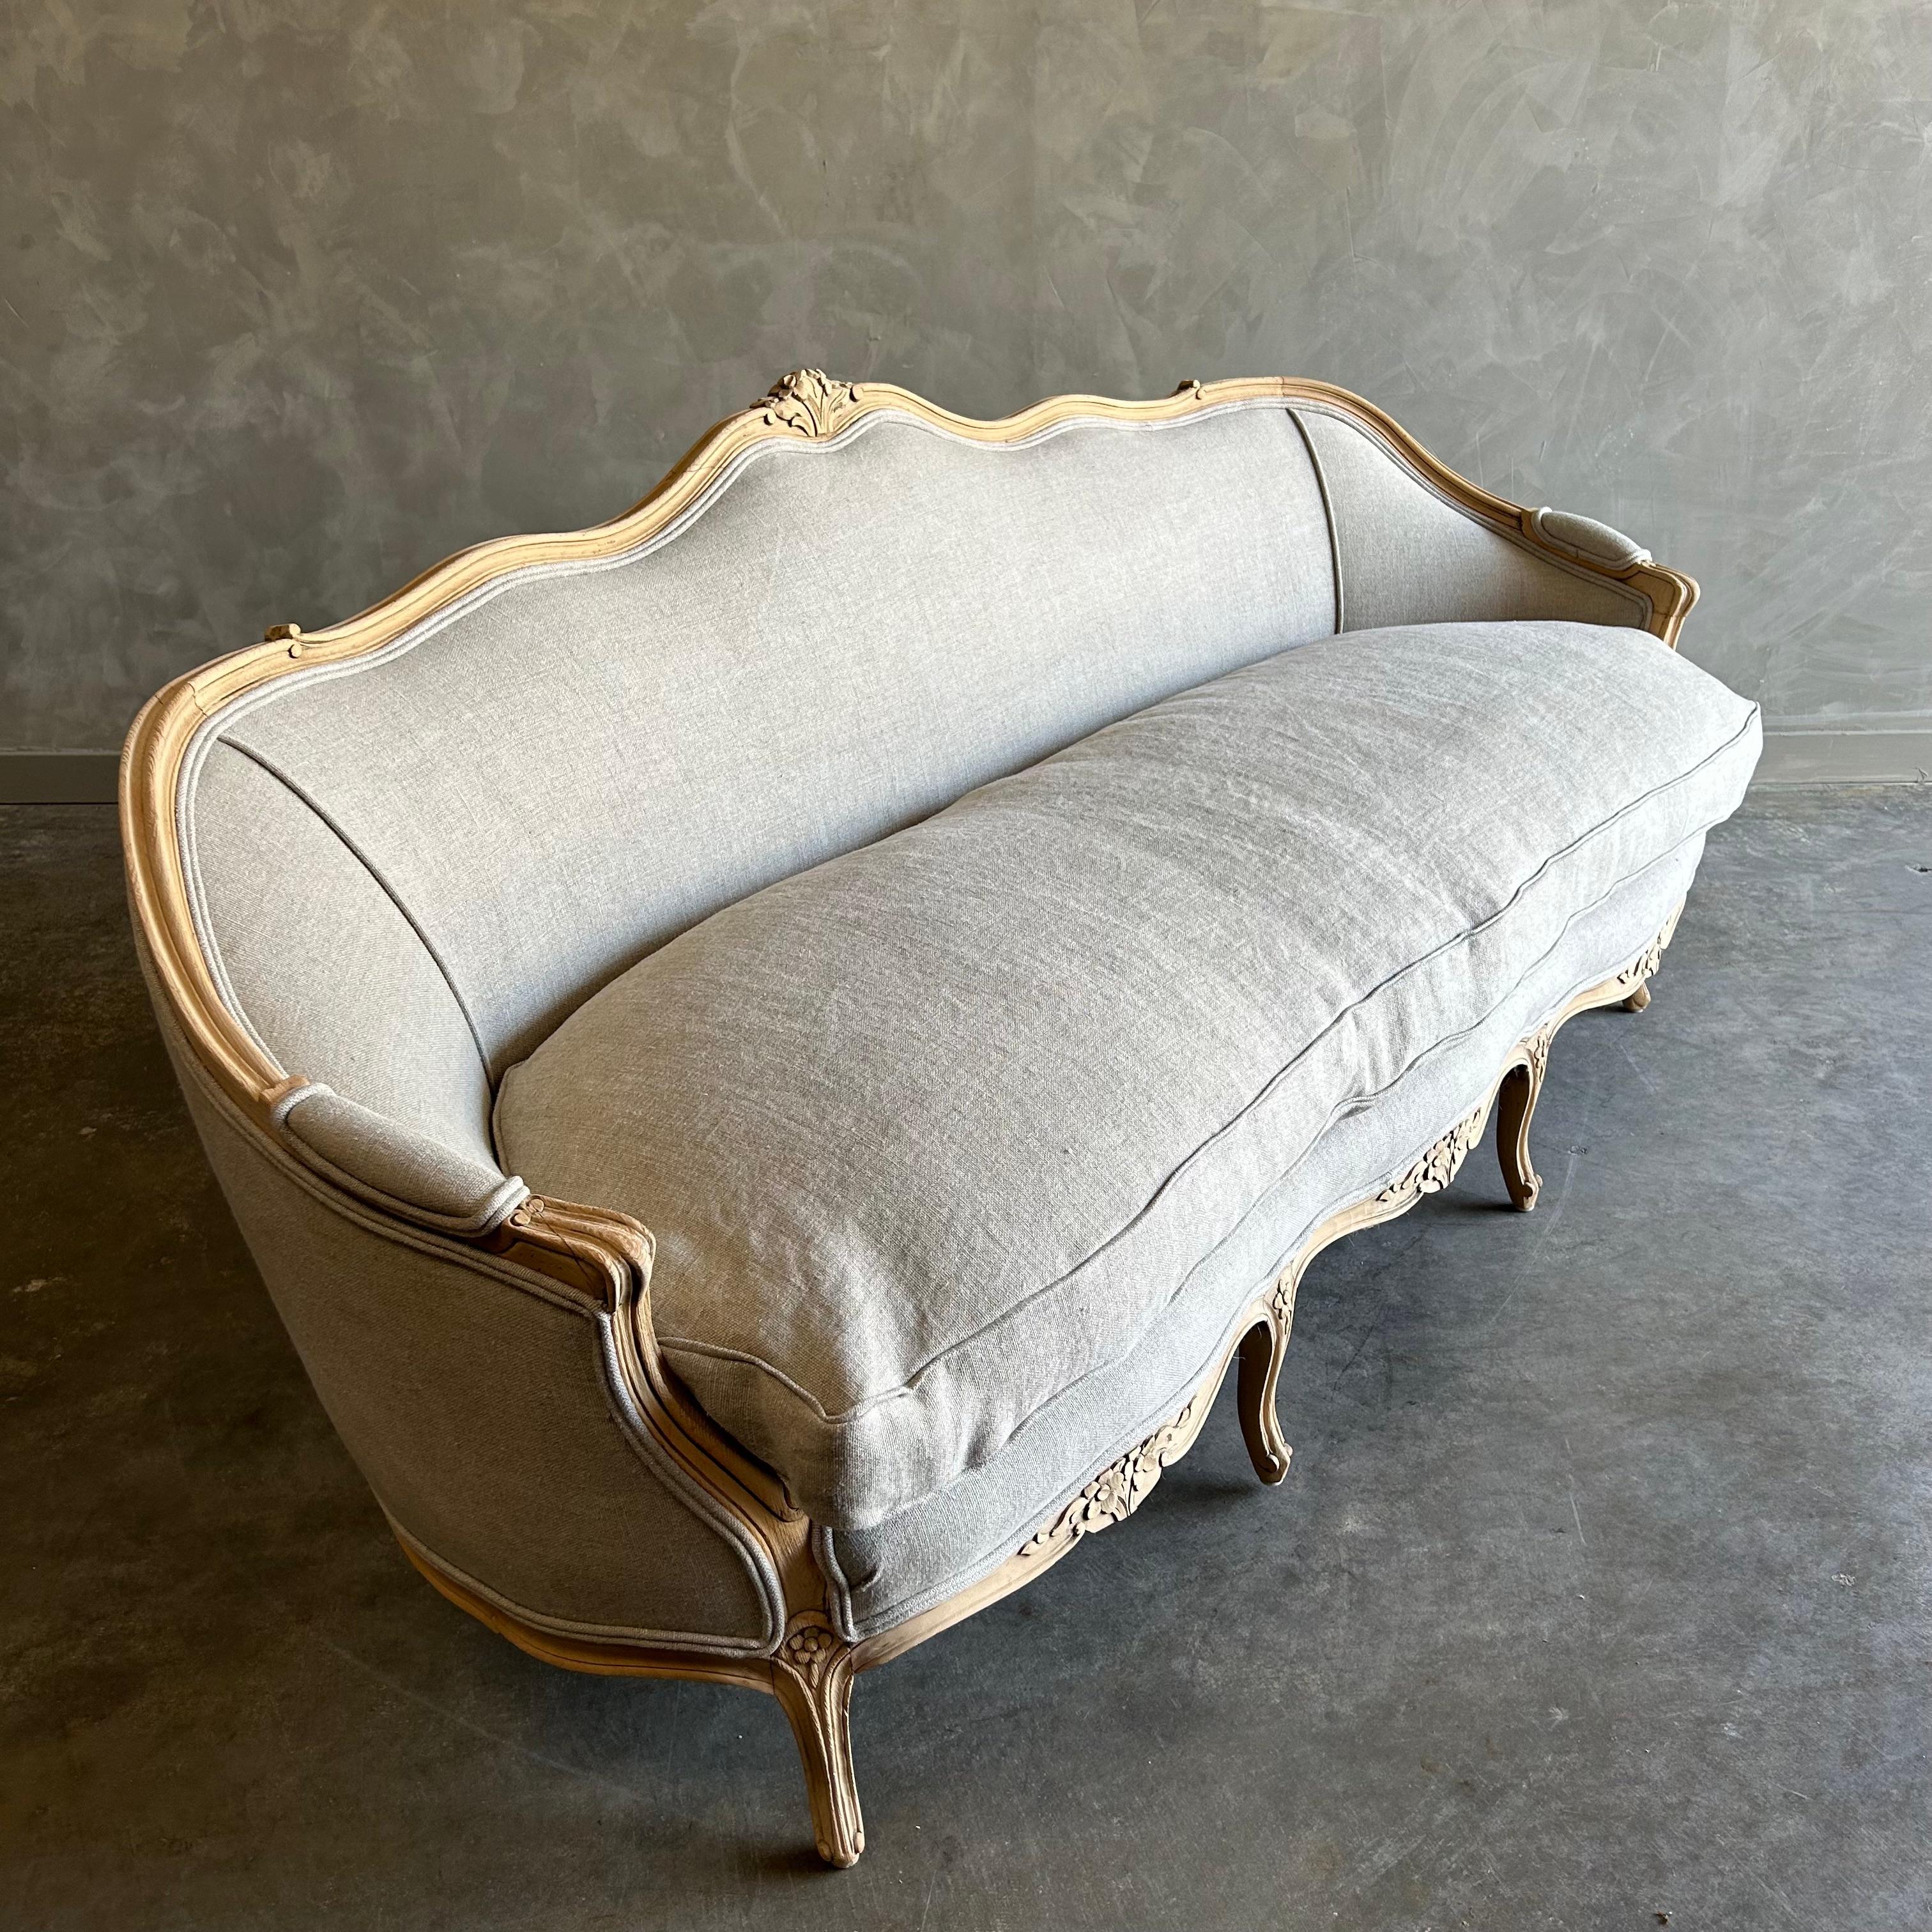 European Antique French Louis XV Style Sofa in Bleached Oak and Irish Linen Upholstery